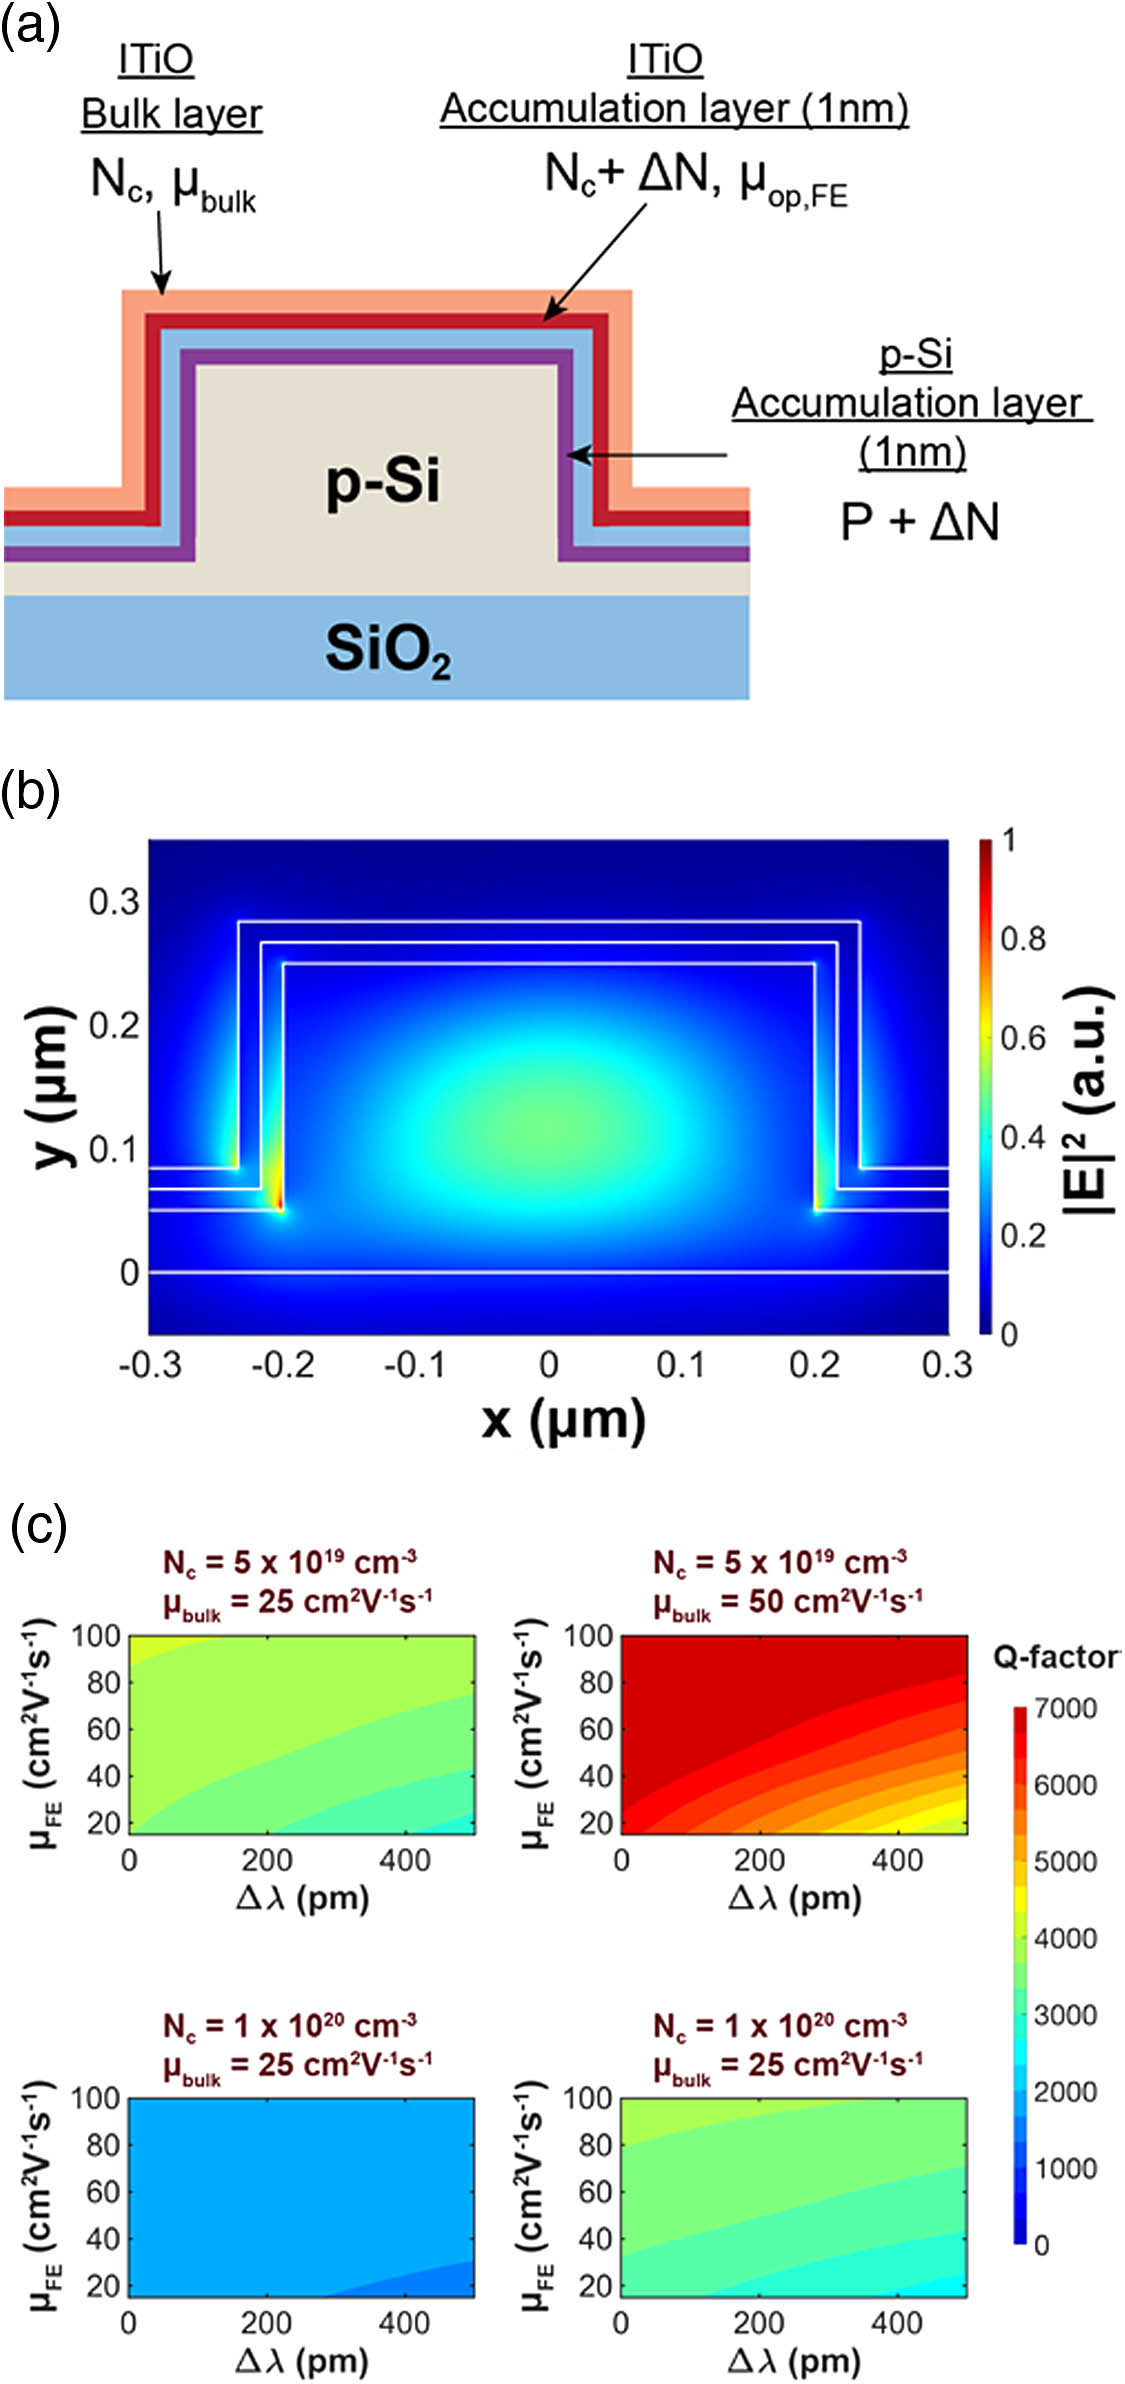 (a) Simulation model includes the p-Si layer, SiO2 layer, and the ITiO, consisting of the bulk material and 1 nm accumulation channel. (b) Simulated cross-sectional electric field intensity (|E|2) distribution of the ITiO-gated MOS bending waveguide with a 17 nm SiO2 layer and a 17 nm ITiO layer. (c) Q factor maps, with respect to μop,FE and Δλ, in different bulk conditions.